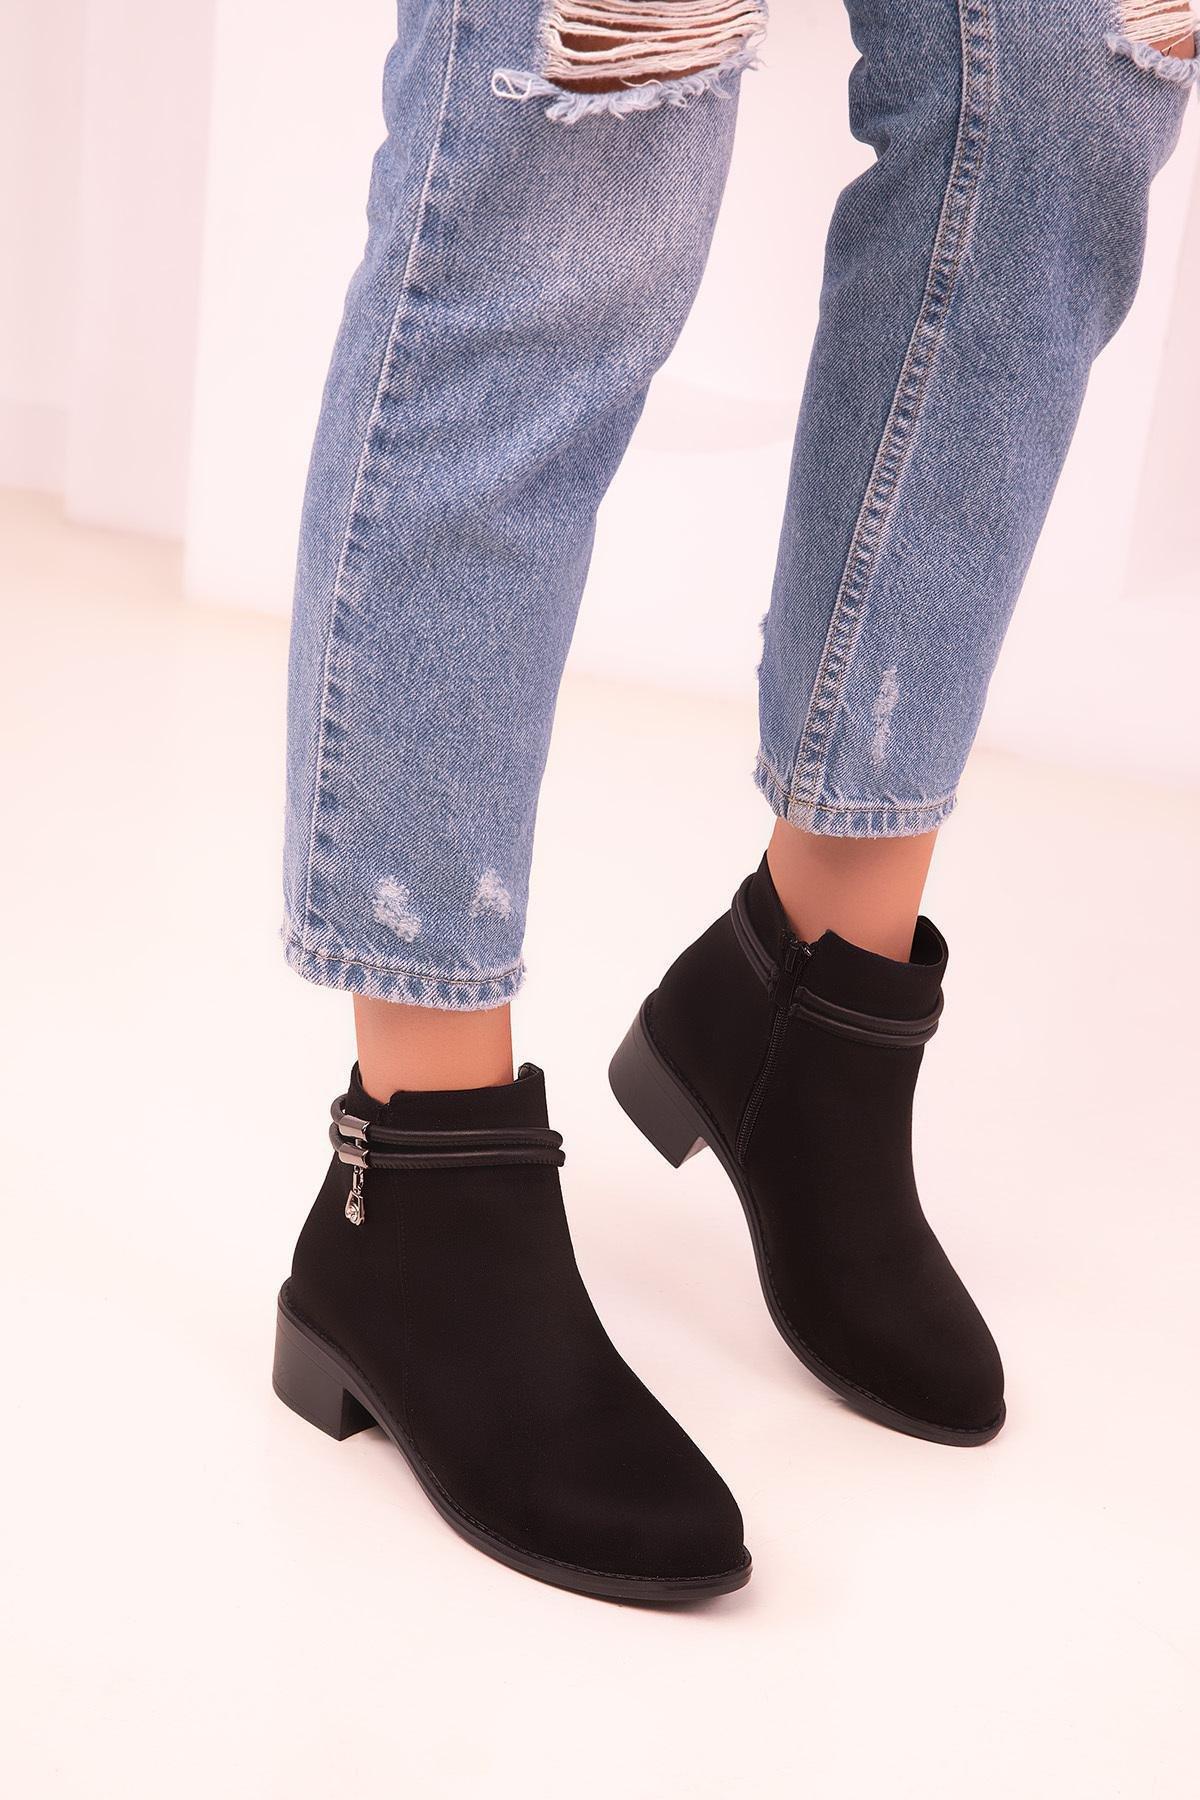 SOHO - Black Suede Boots